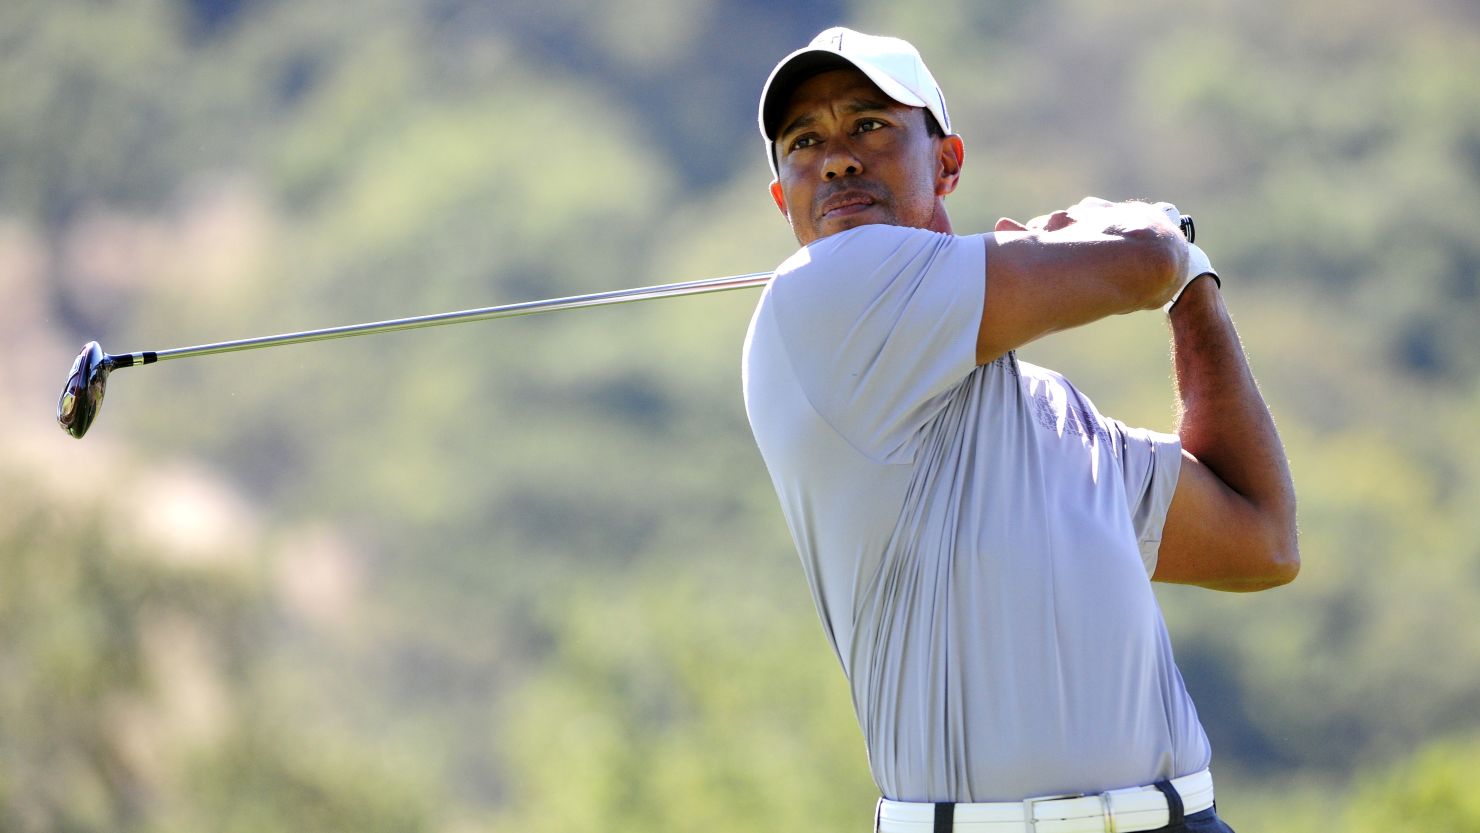 Tiger Woods makes a tee shot on the ninth hole during his second round at the CordeValle Golf Club.